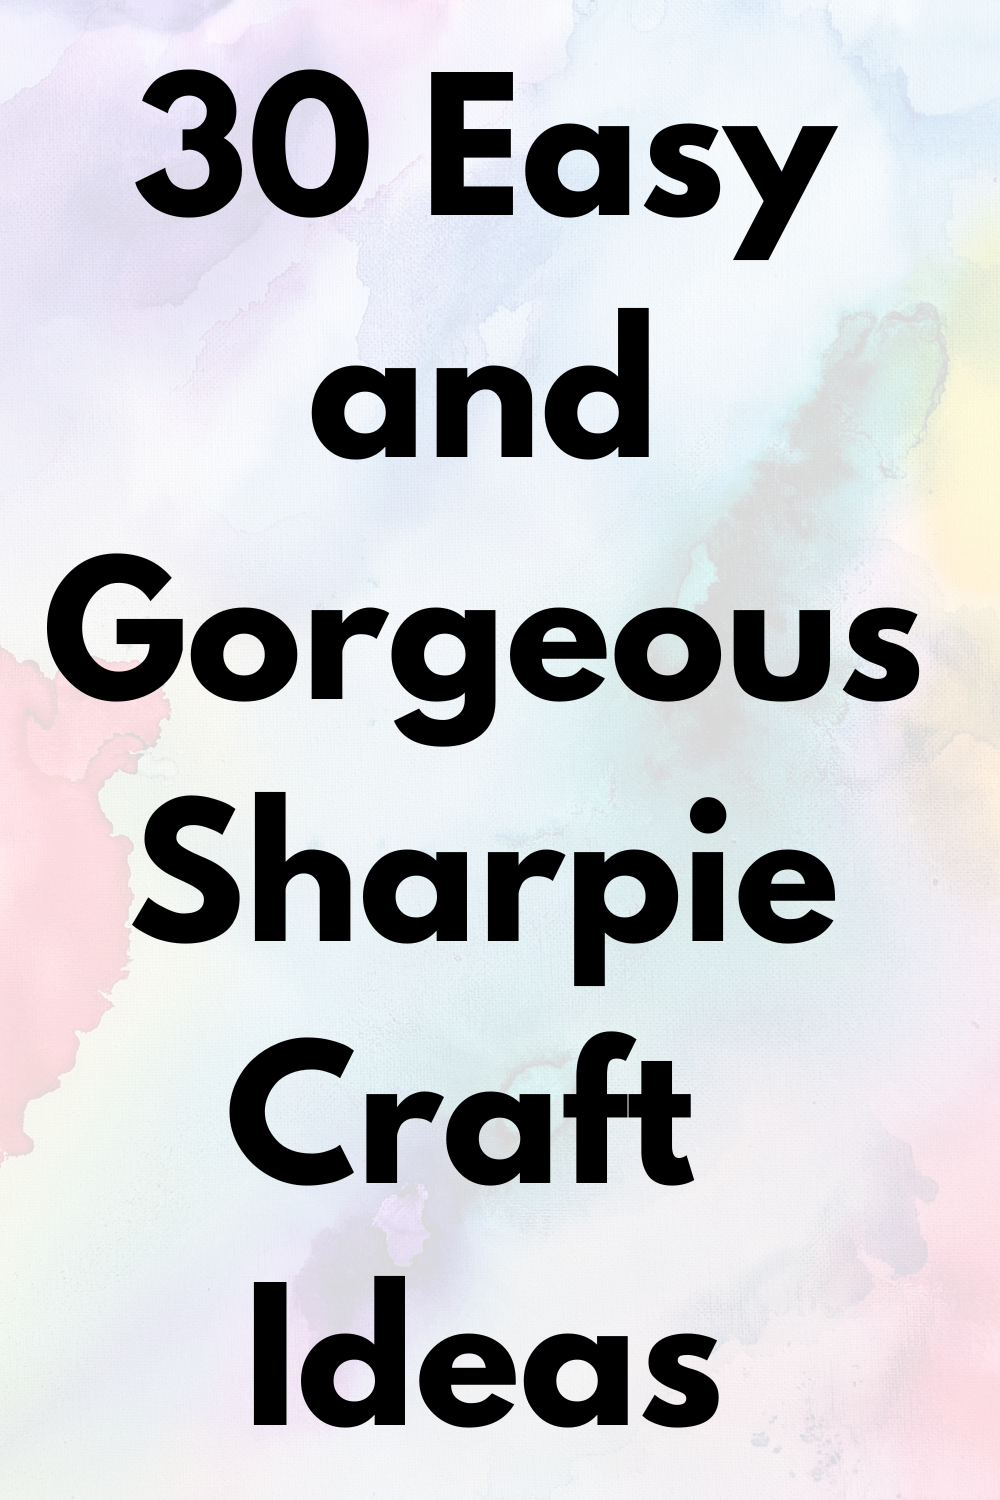 30 Easy and Gorgeous Sharpie Craft Ideas